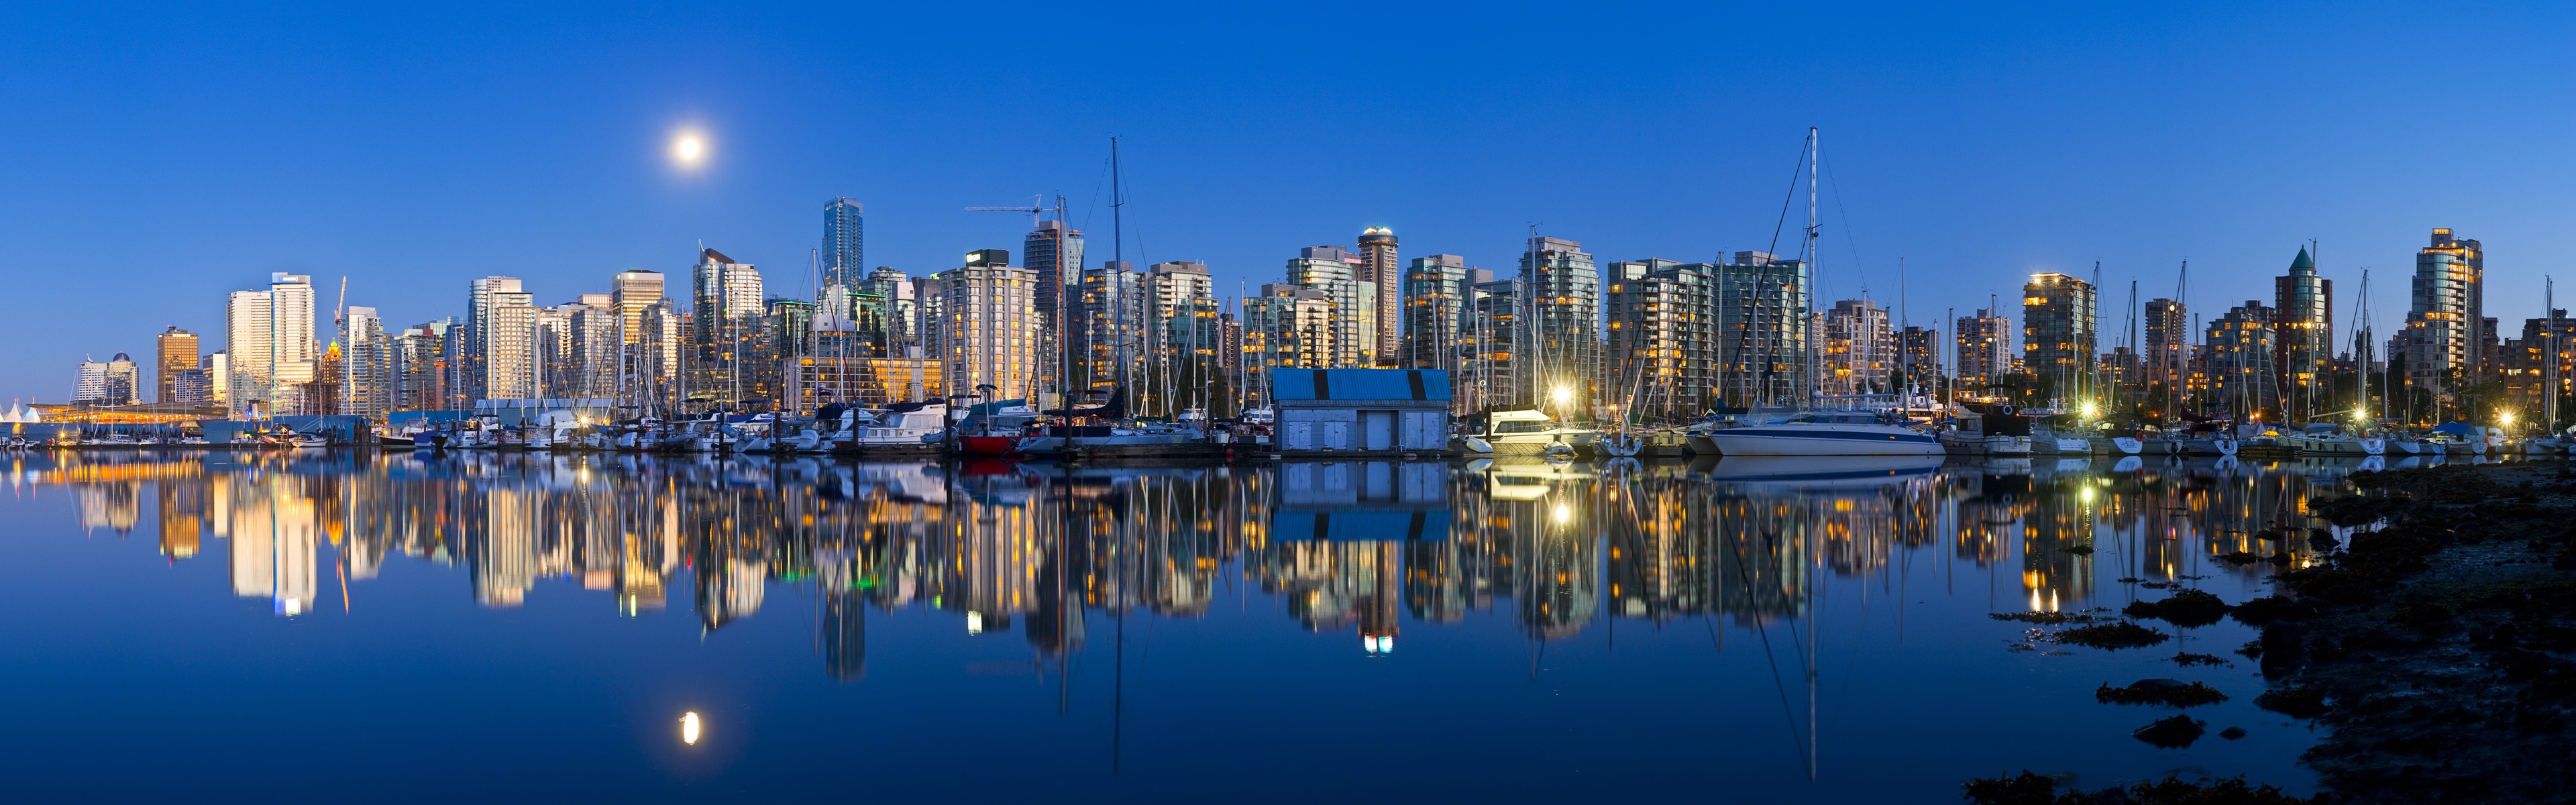 Vancouver-British-Columbia-Canada-city-night-boats-skyscrapers-water-reflection_3840x1200.jpg